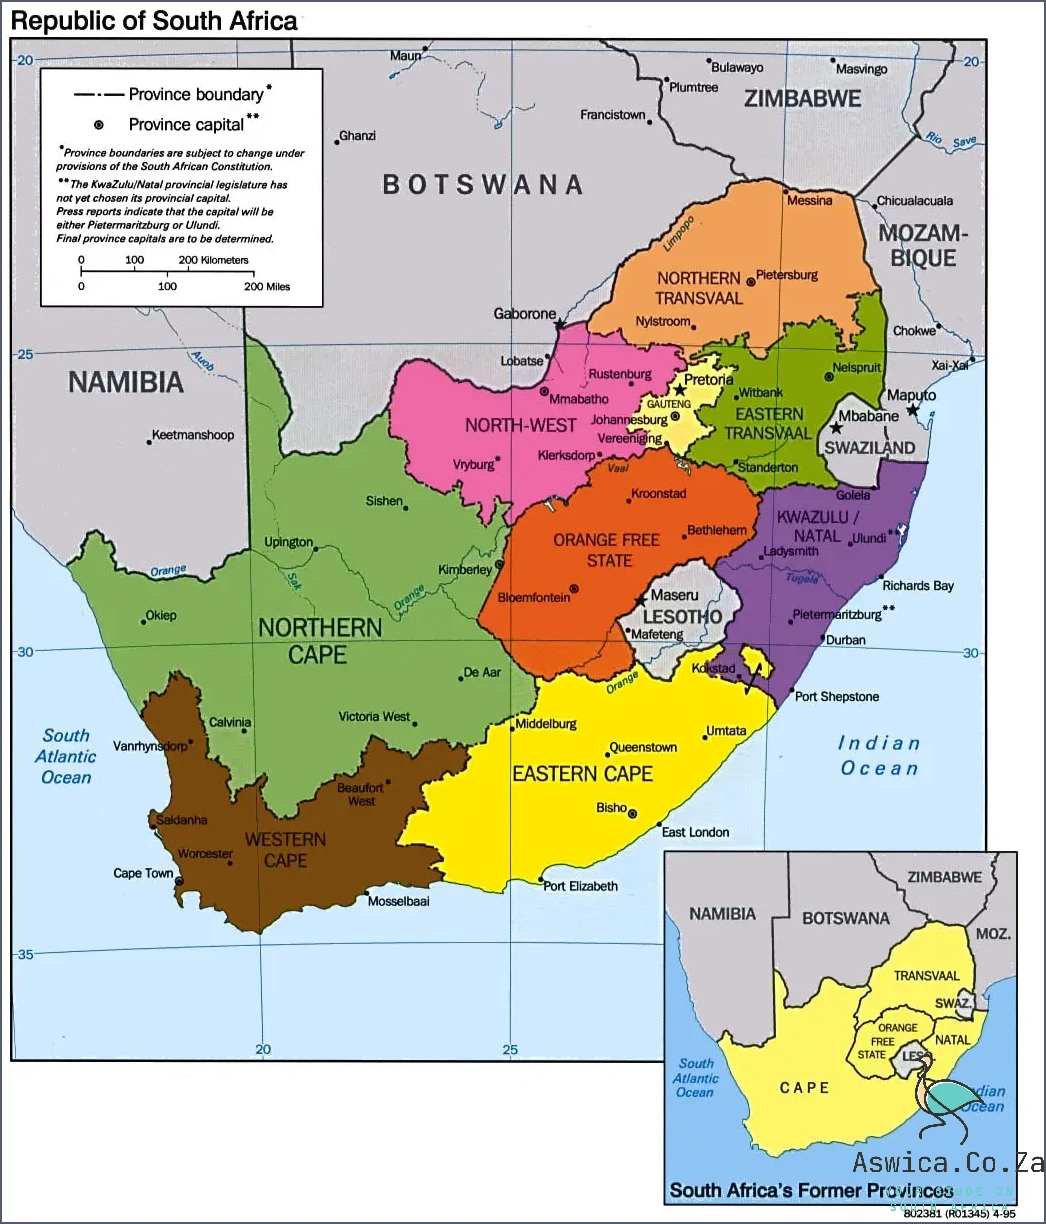 Stunning South Africa Map Images Revealed!